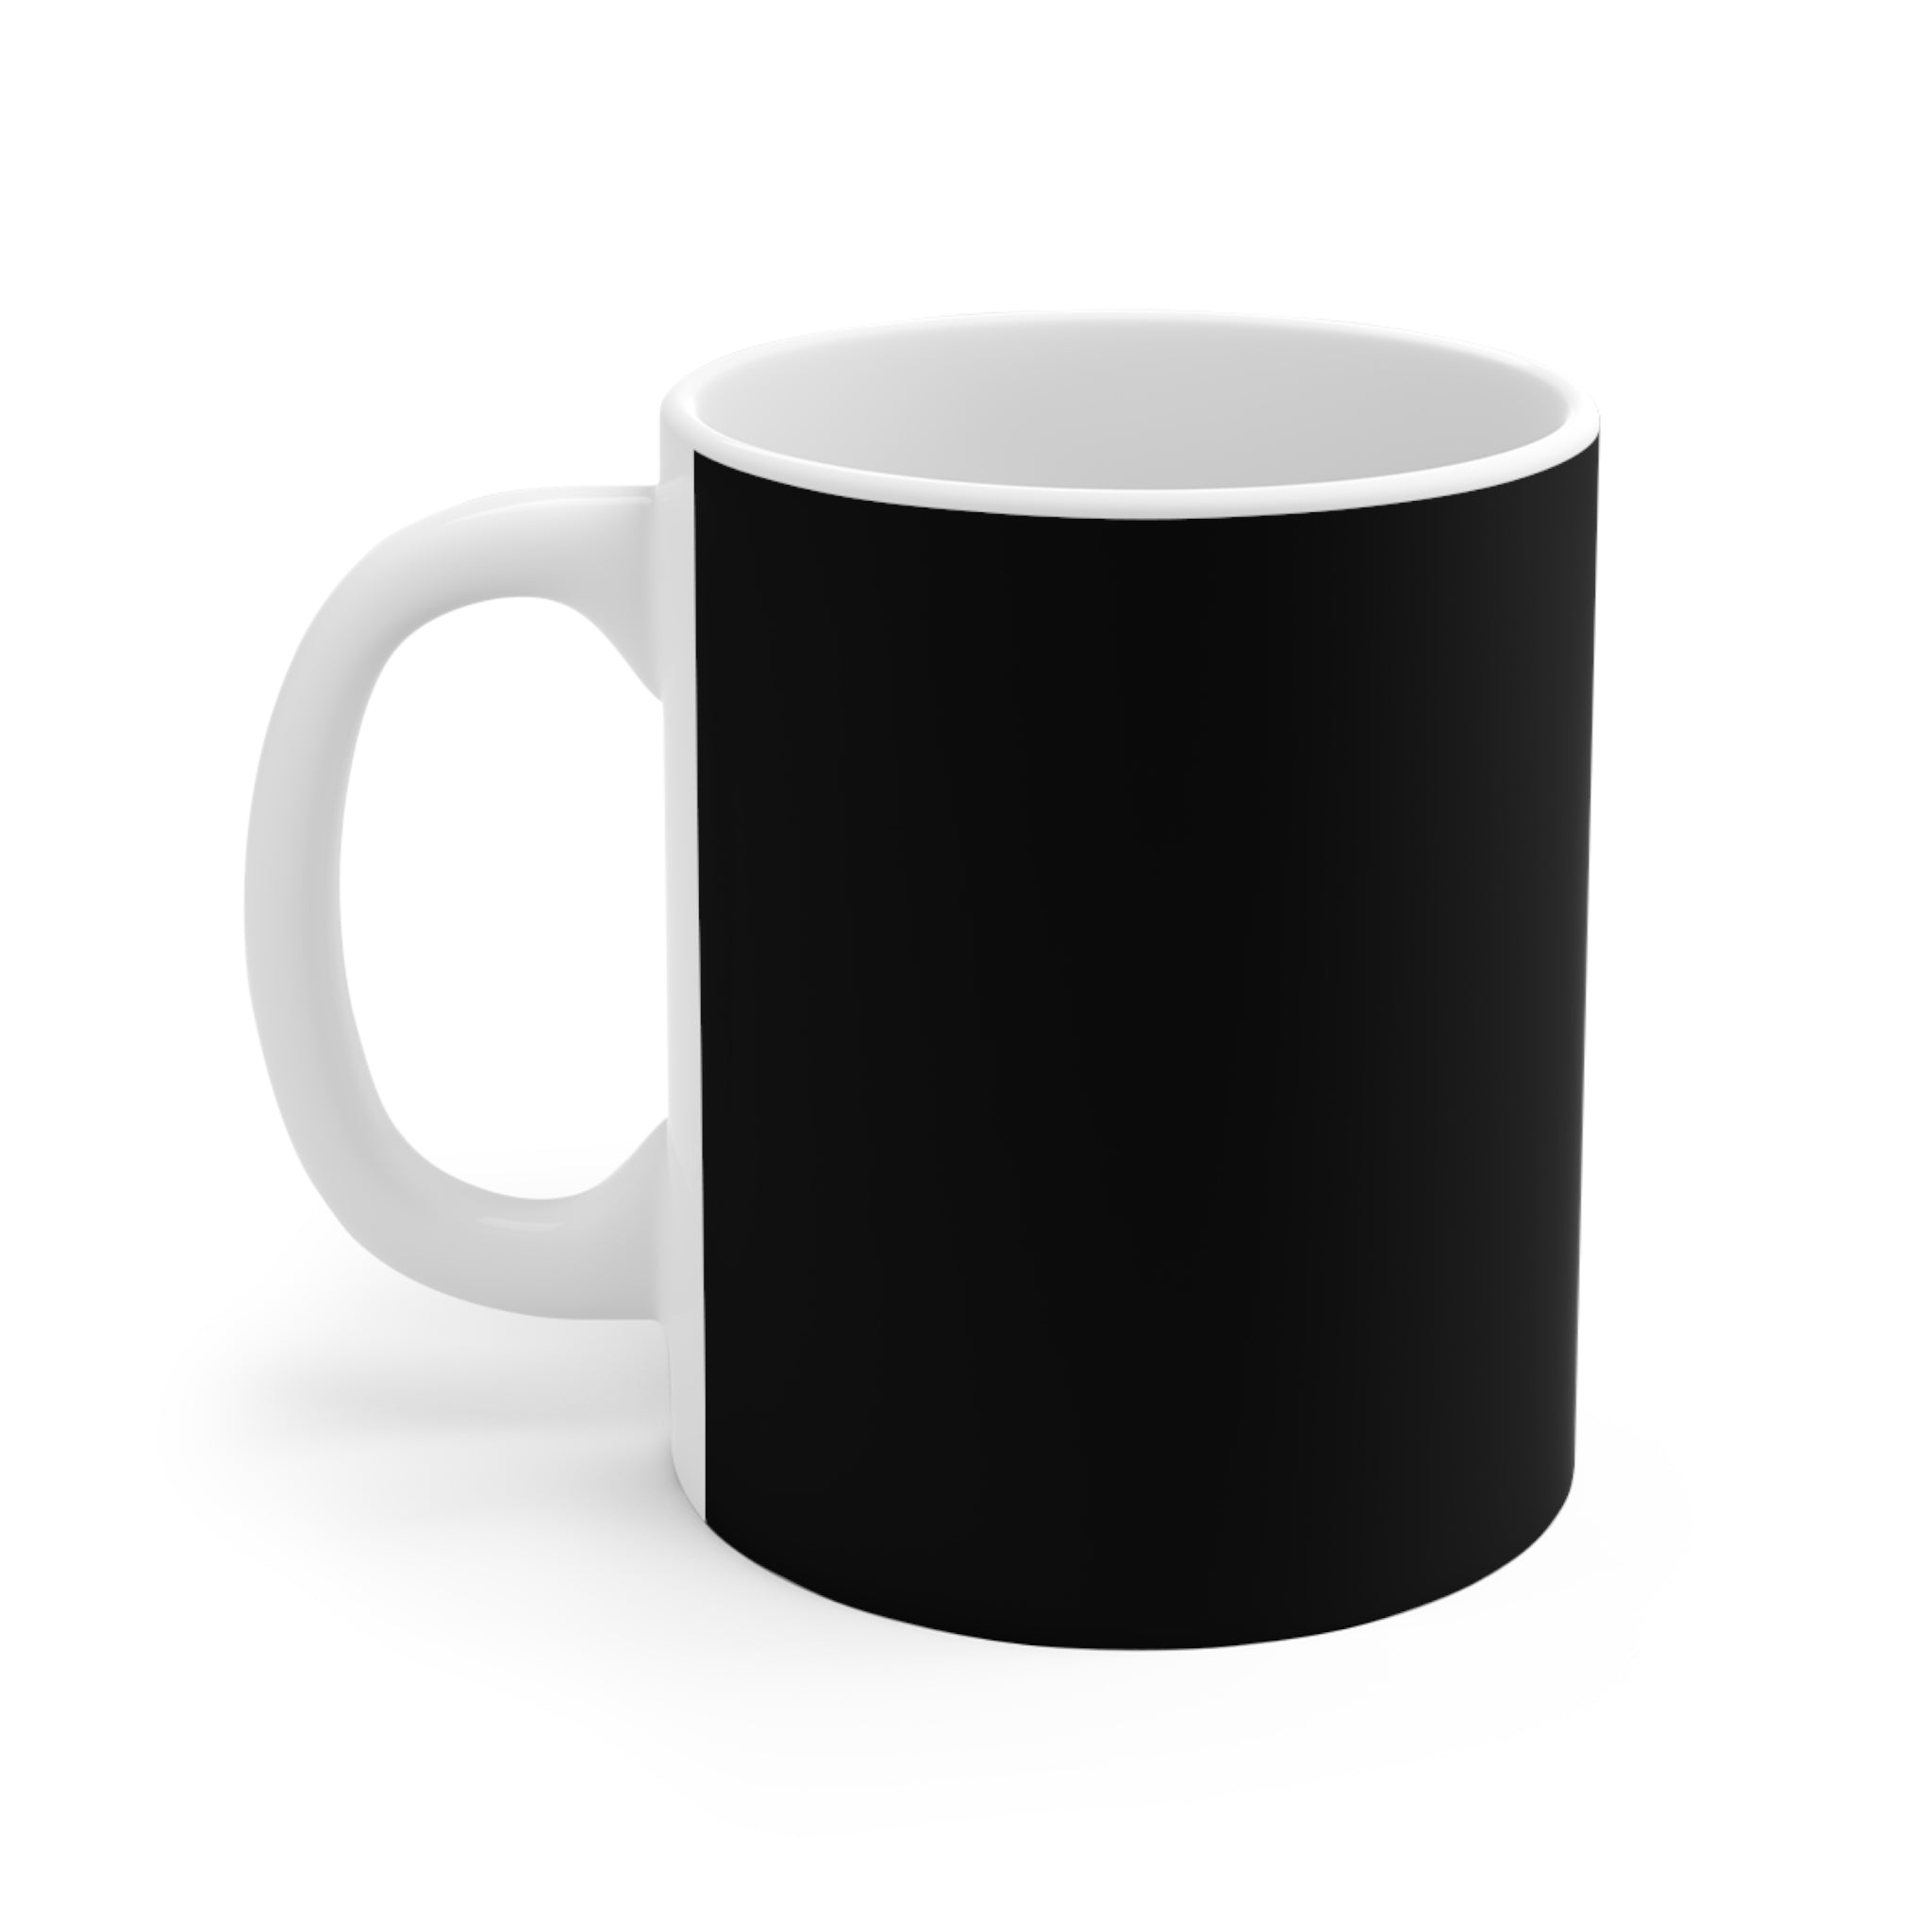 This is KRUTO Black Coffee Cup